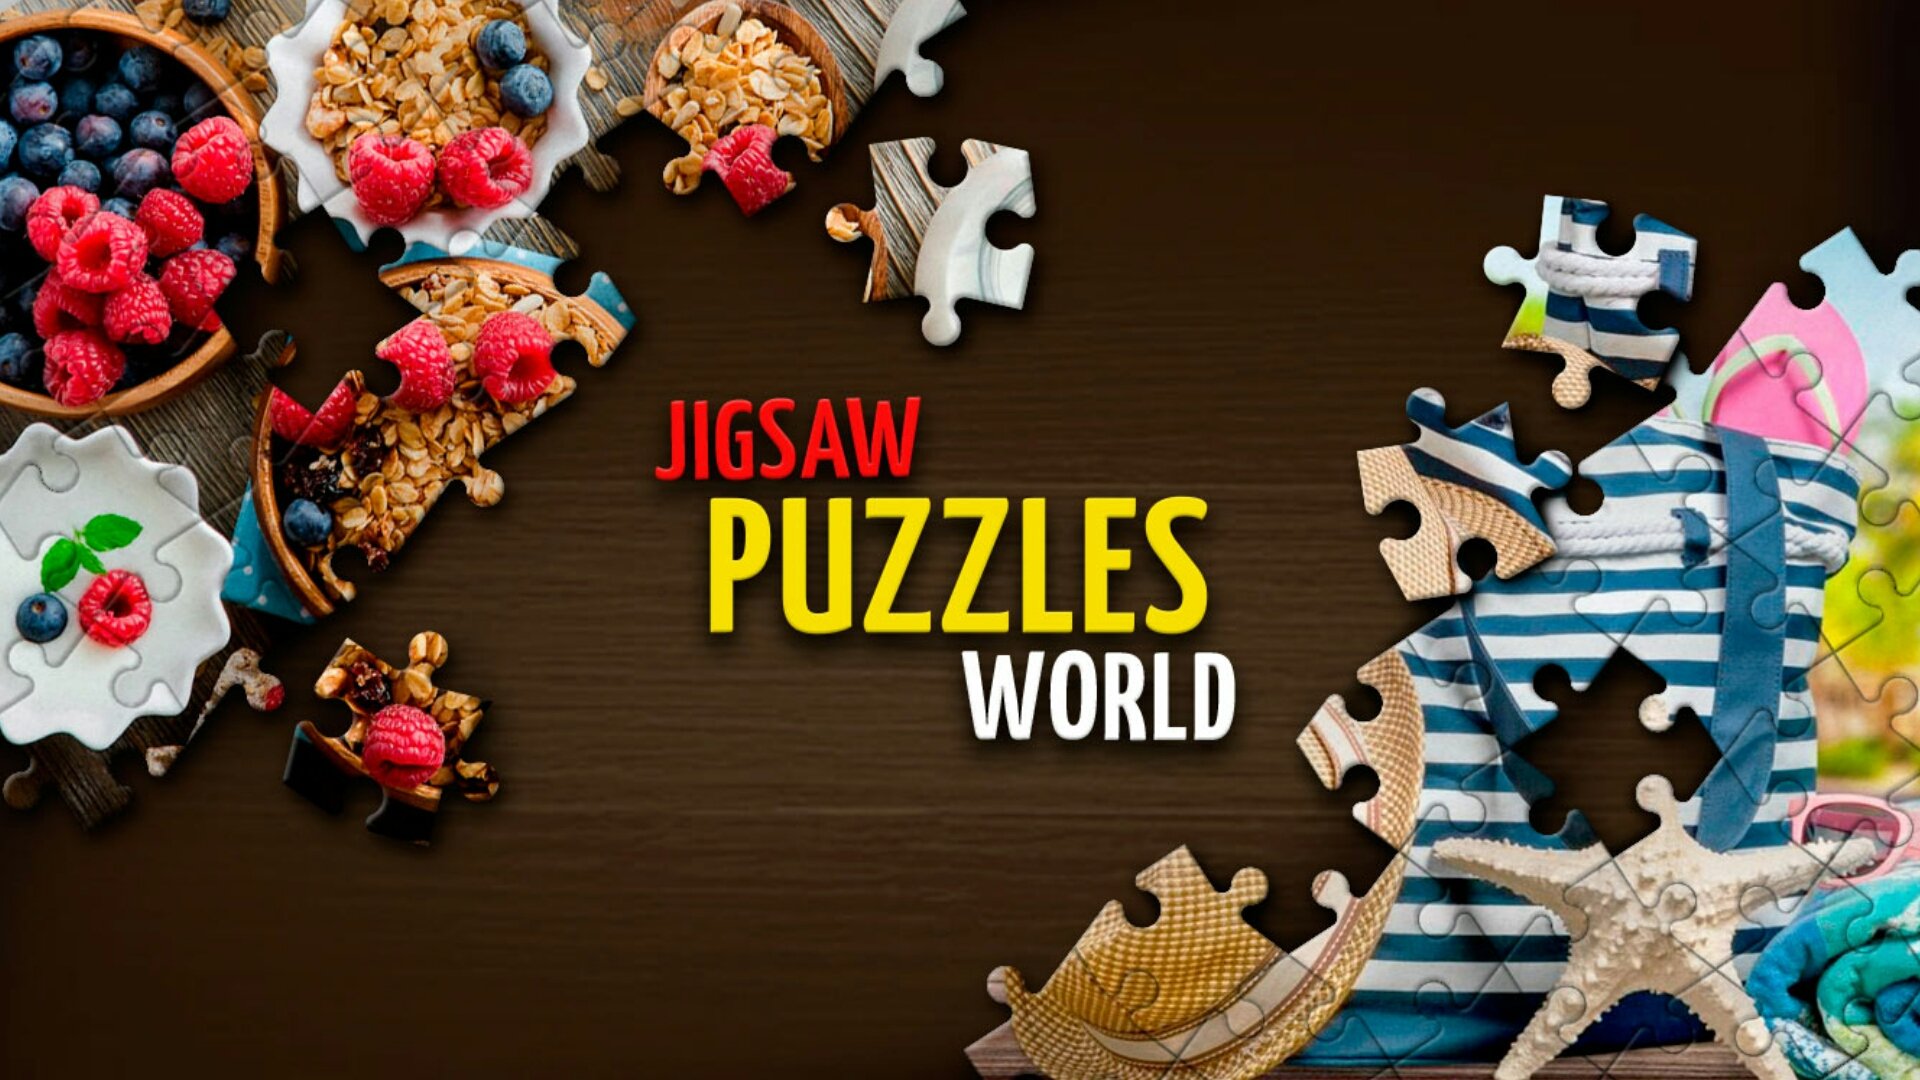 jigsaw-puzzles-world-android-games-download-free-jigsaw-puzzles